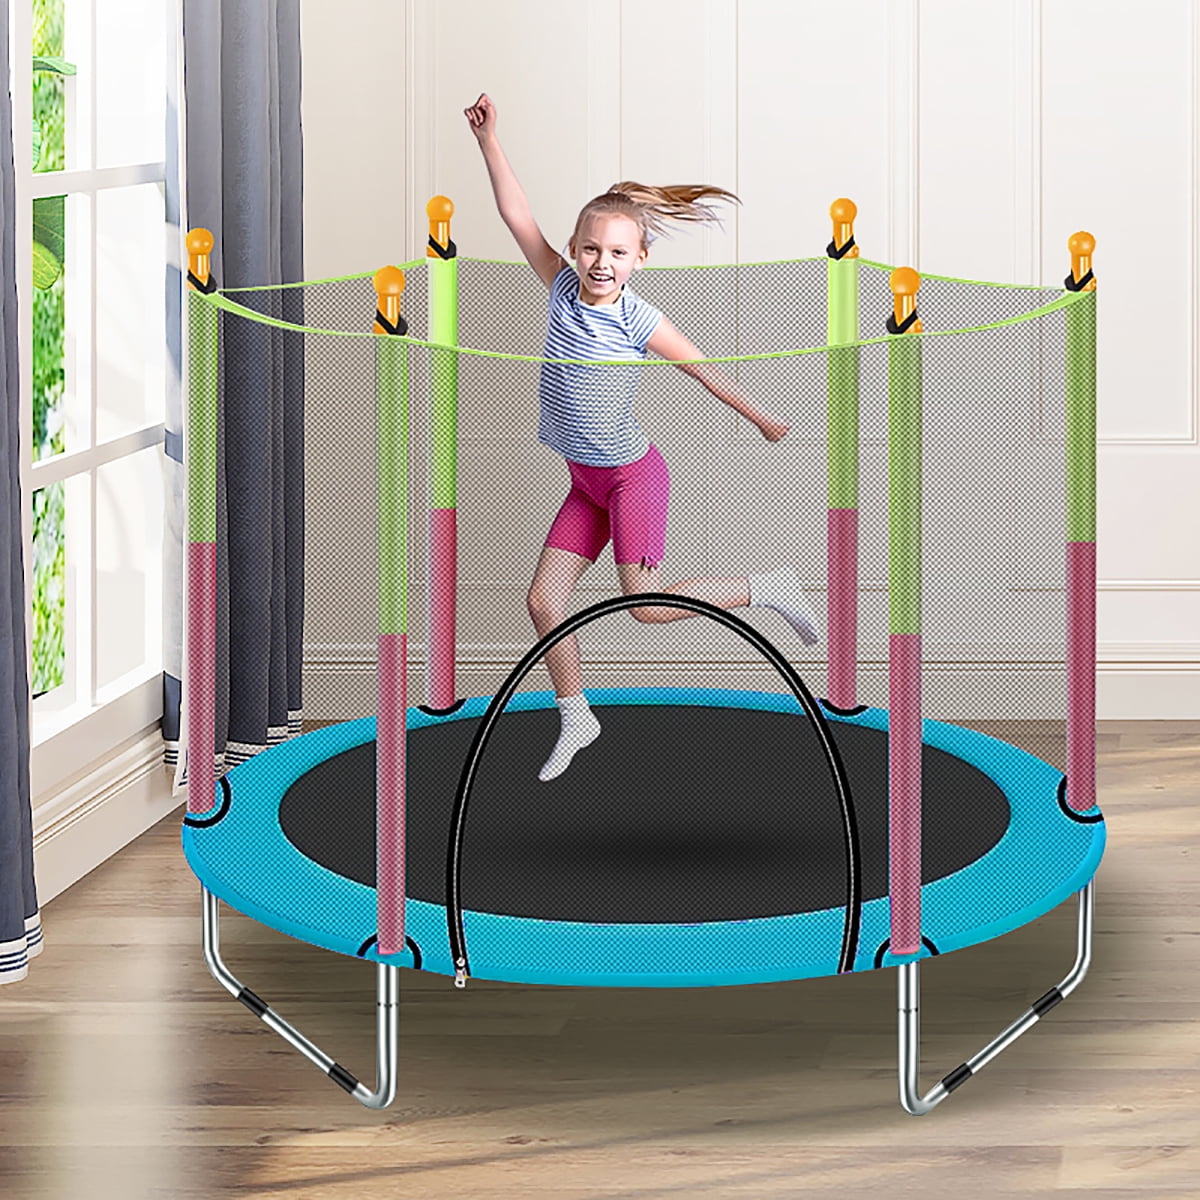 Kids Trampoline,  Mini Trampoline for Kids with Enclosure Net and Safety Pad, Heavy Duty Frame Round Trampoline for Indoor Outdoor, 441 LB Capacity